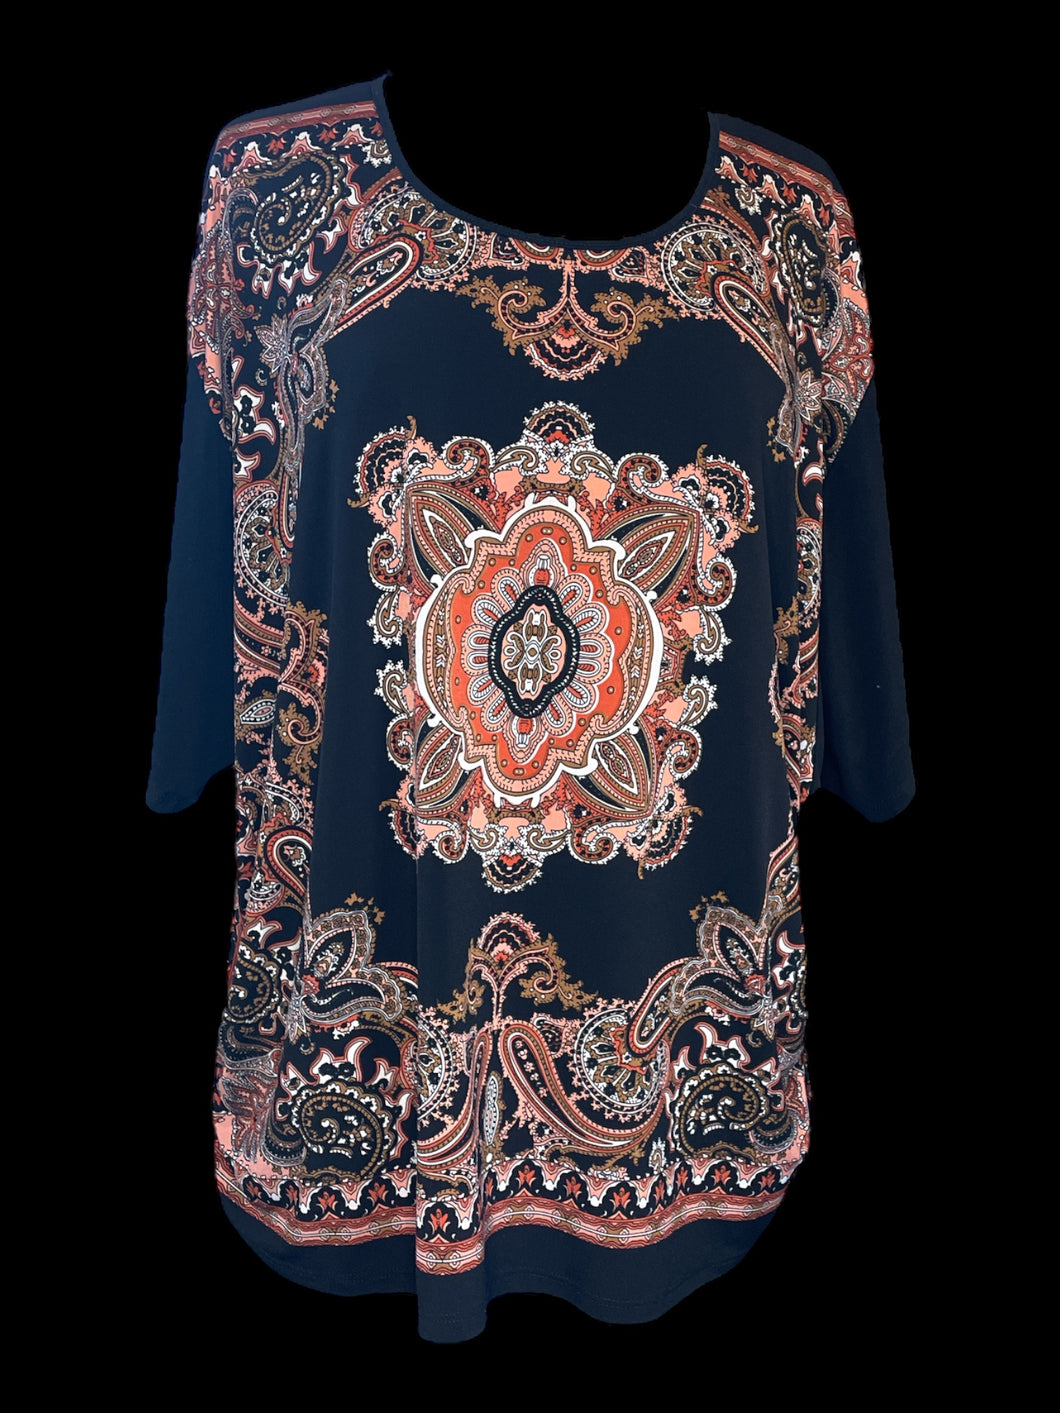 3X Black & pink, white, & gold paisley short batwing sleeve scoop neck top w/ o-ring keyhole back, & ruched sides